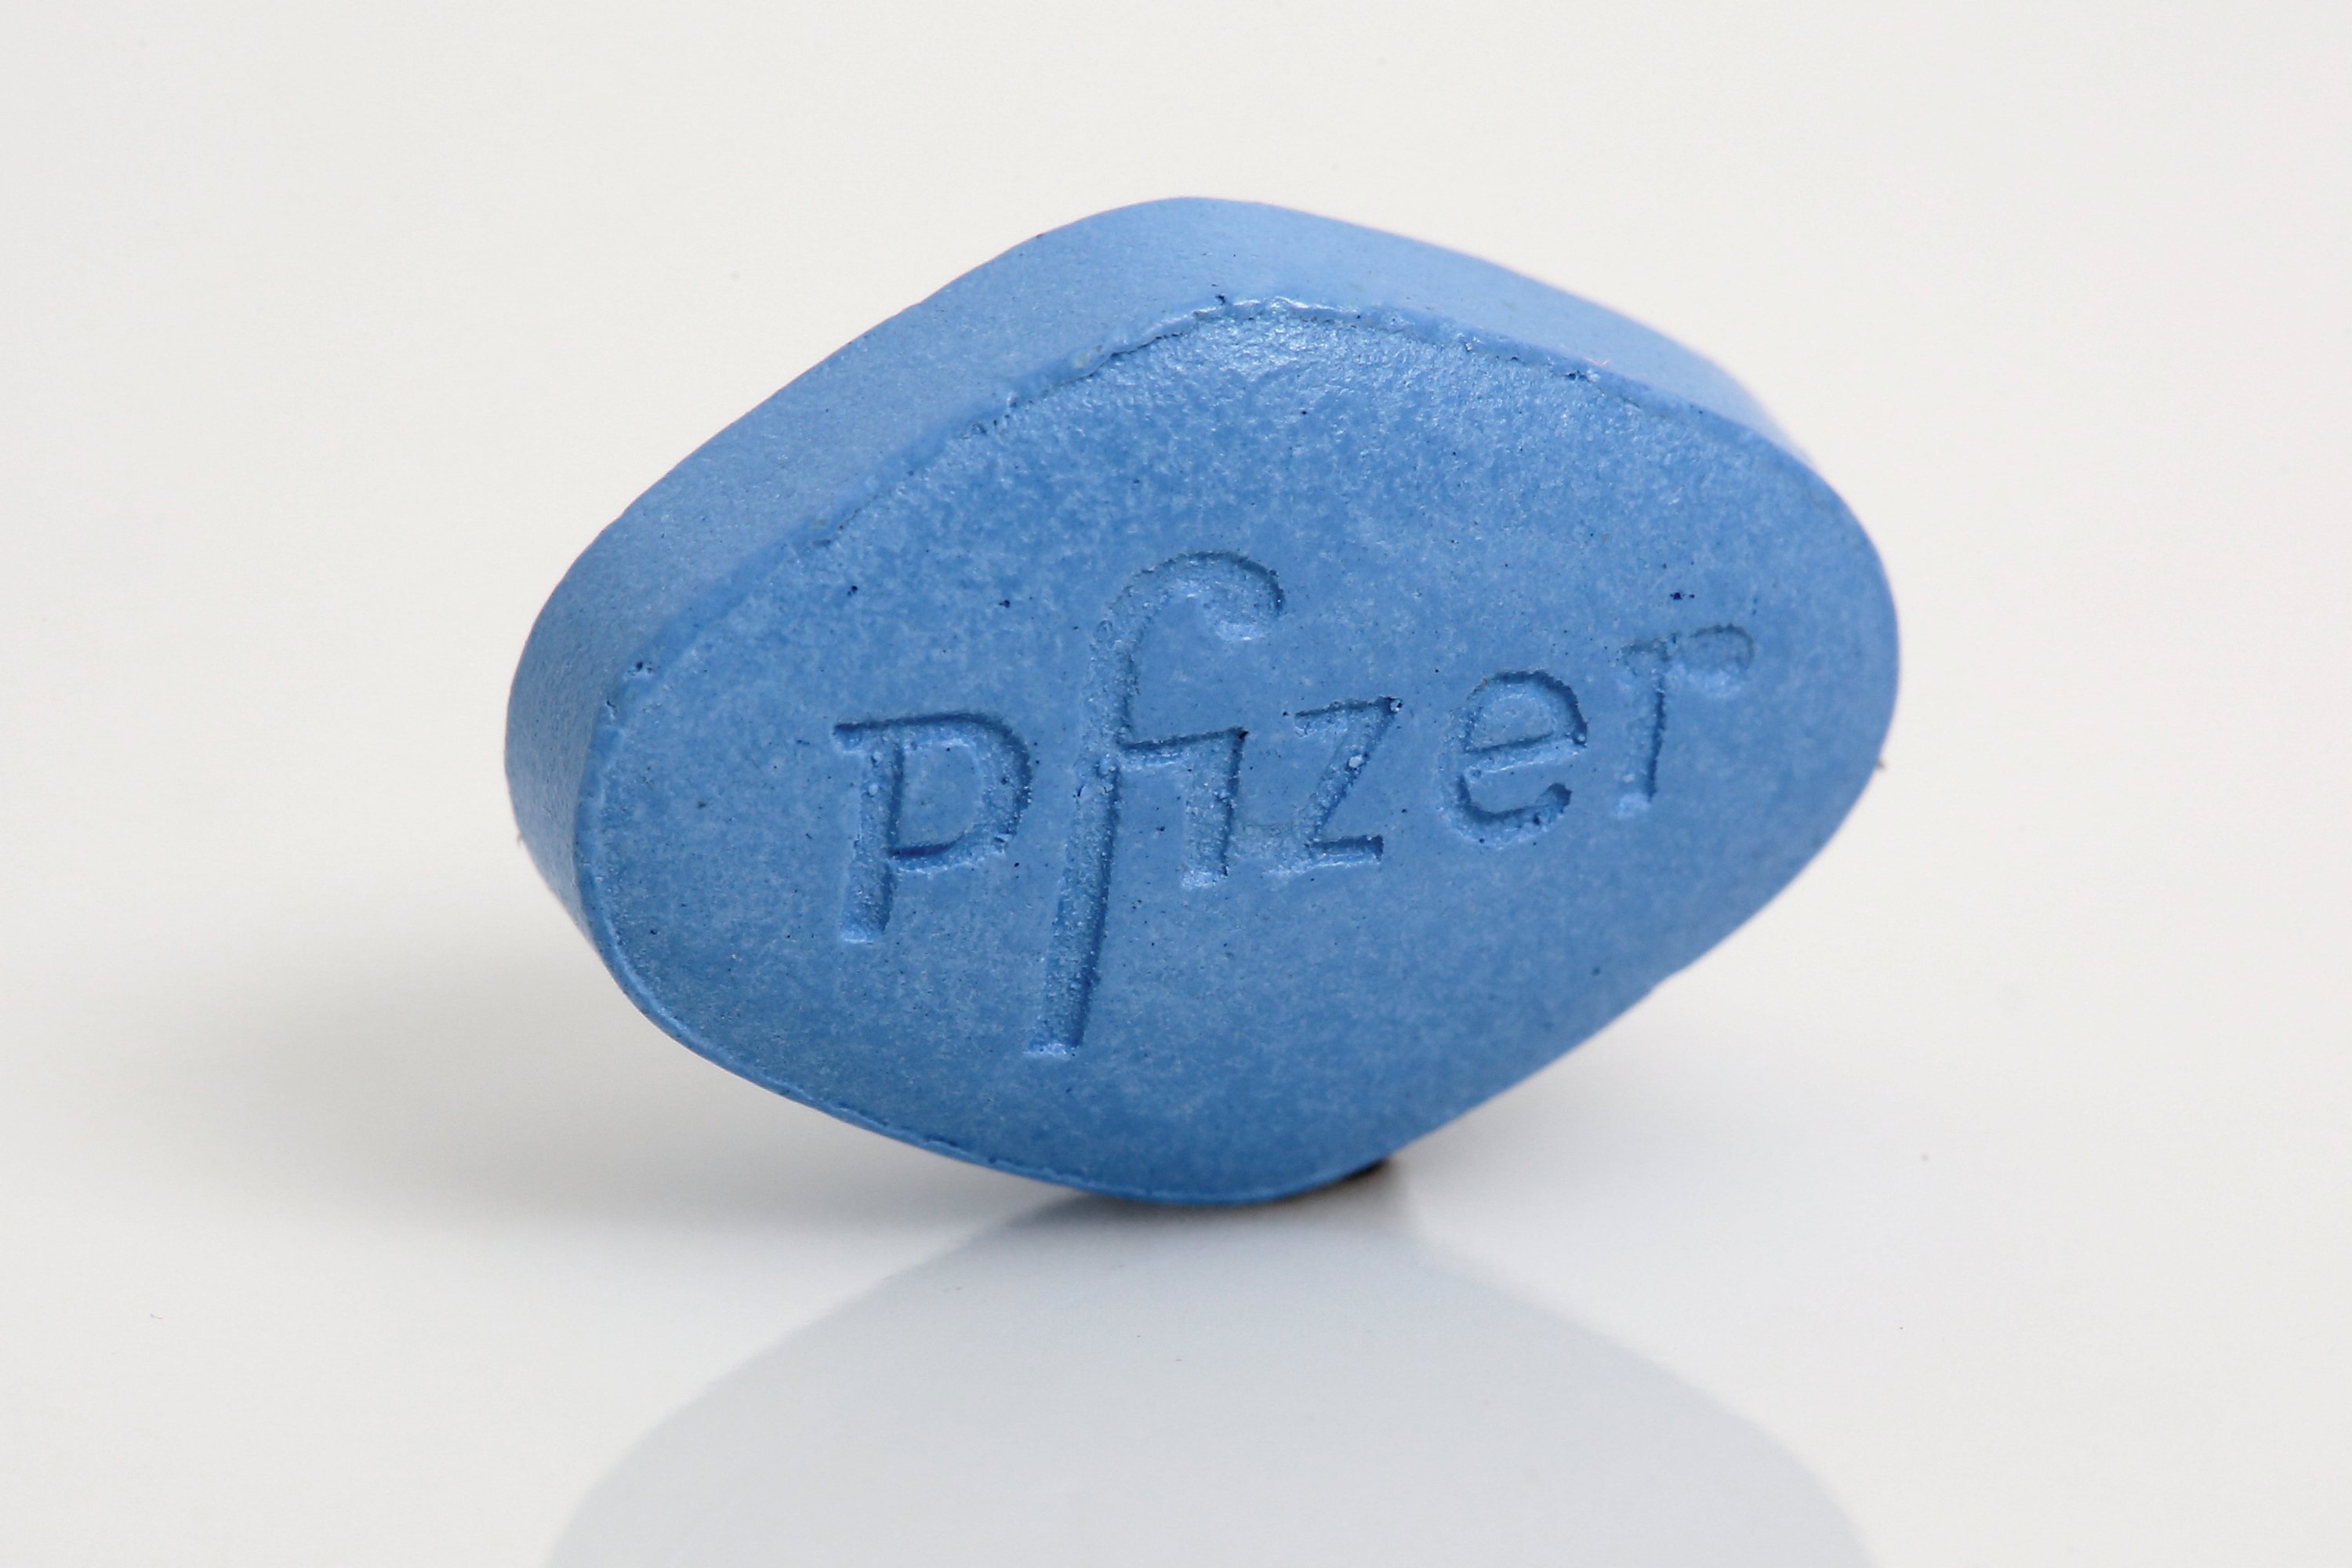 Study links Viagra to lower Alzheimer's risk but experts have reservations